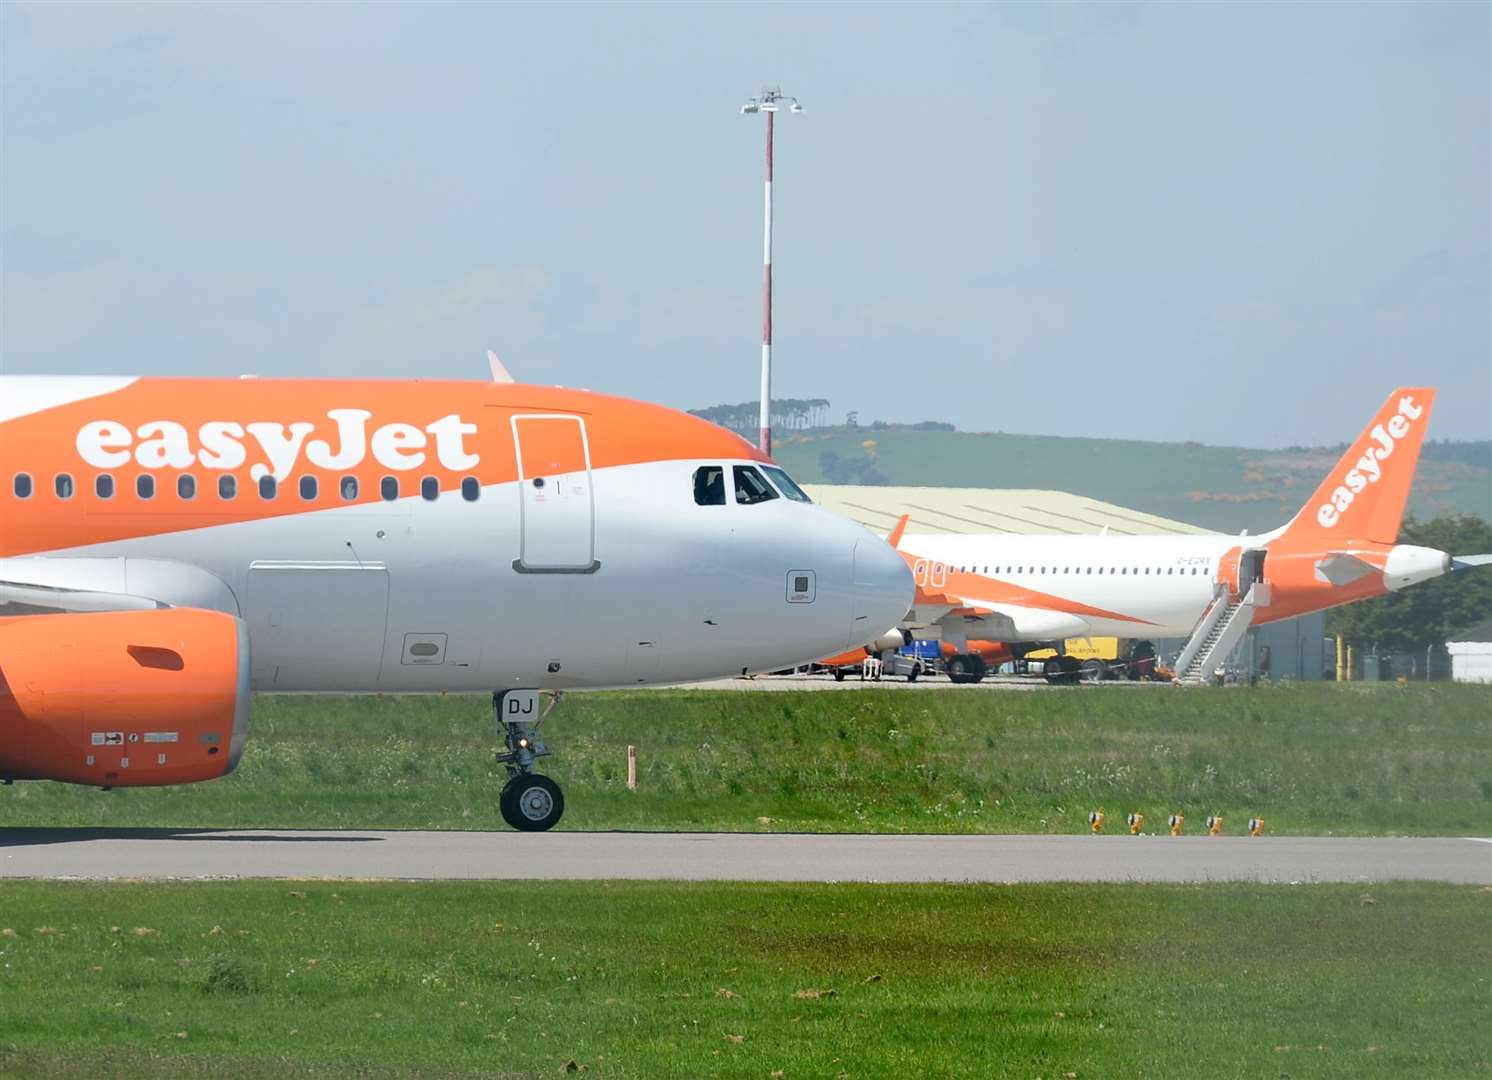 easyJet services have been disrupted.